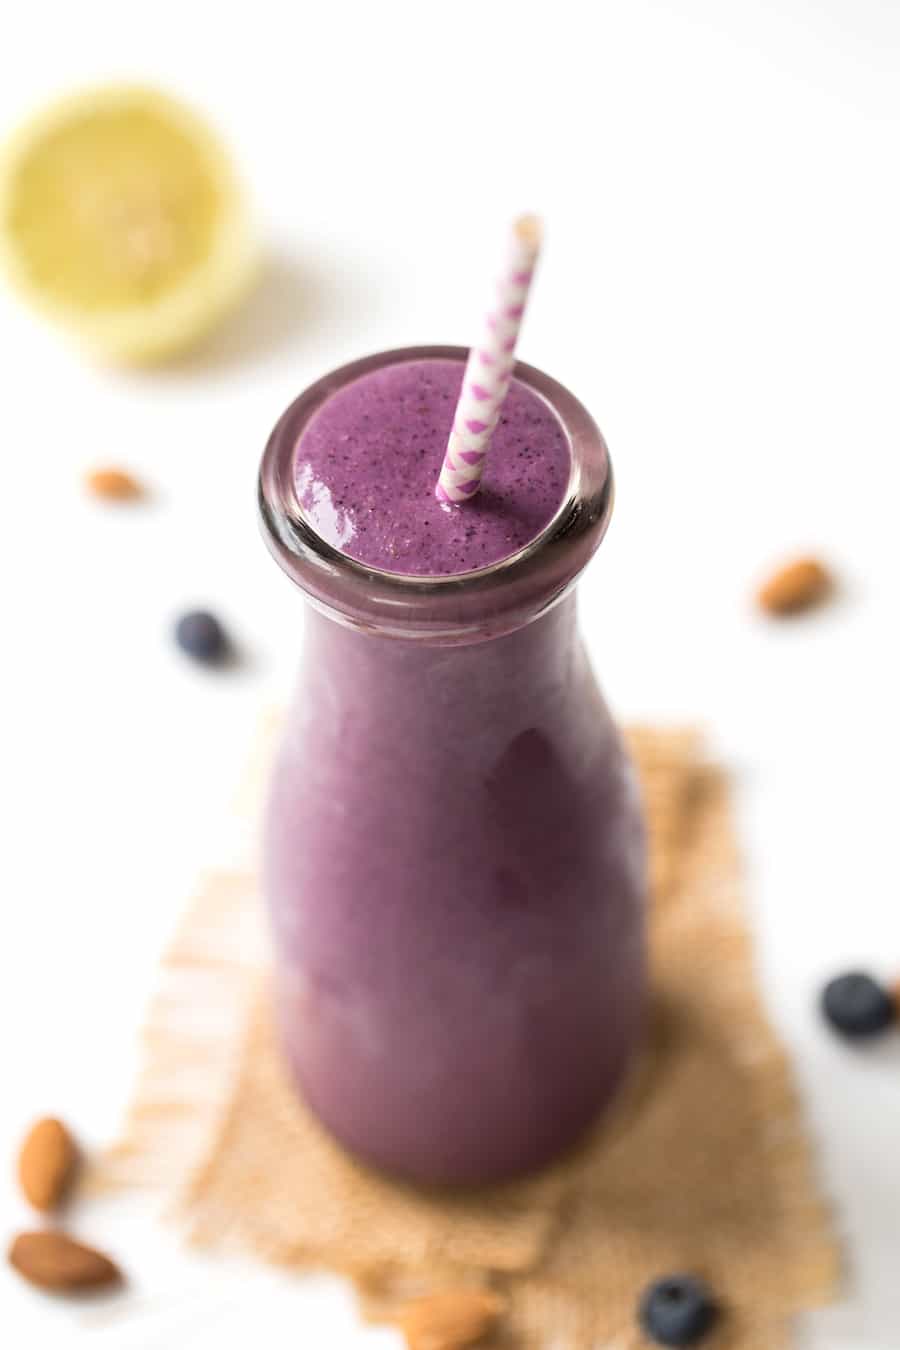 LEMON BLUEBERRY SMOOTHIE -- with almond butter, lemon juice and frozen cauliflower for the creamiest, dreamiest smoothie!